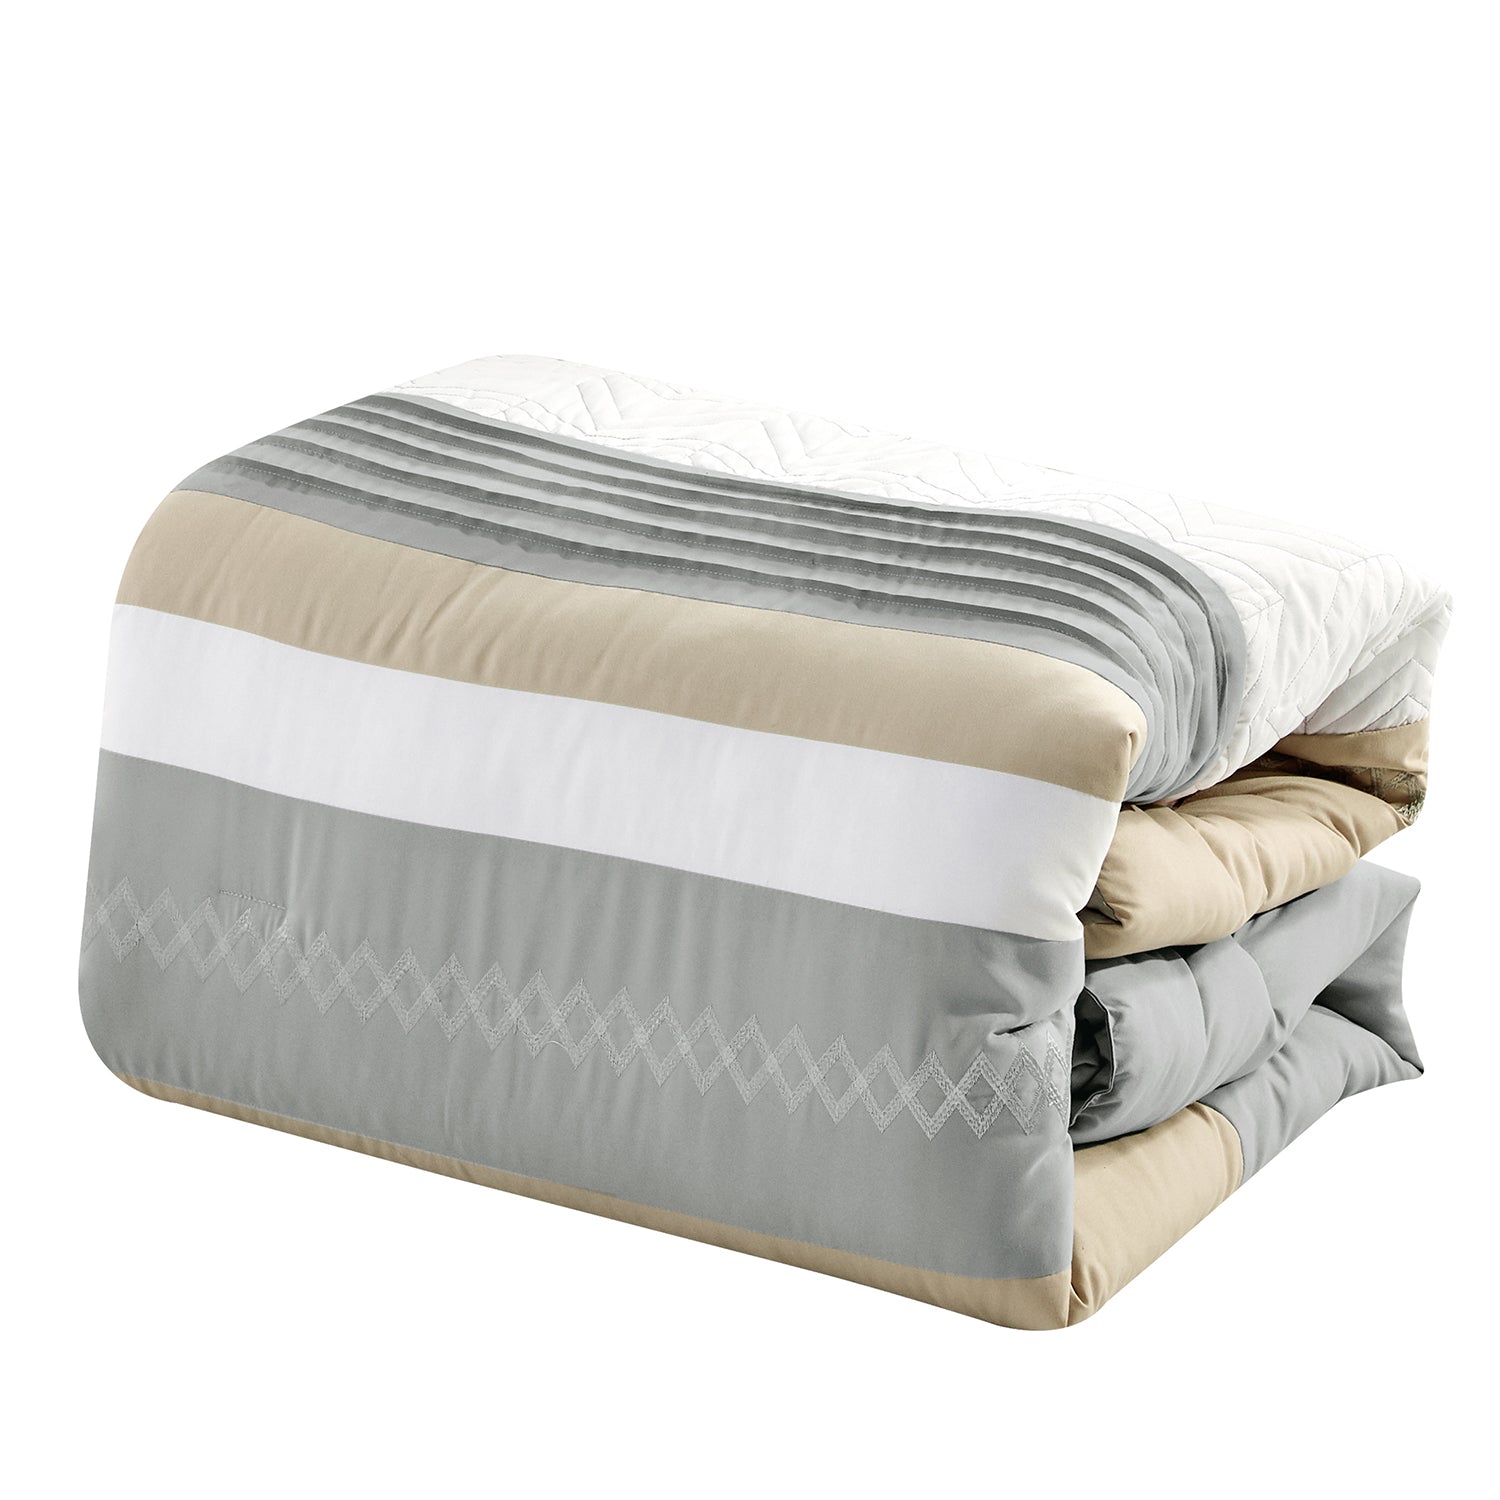 FONTA 7PC BEDDING COMFORTER SET. RUFFLE & PATCHWORK, MICROFIBER FABRIC, FADE RESISTANT, SUPER SOFT, BED IN A BAG